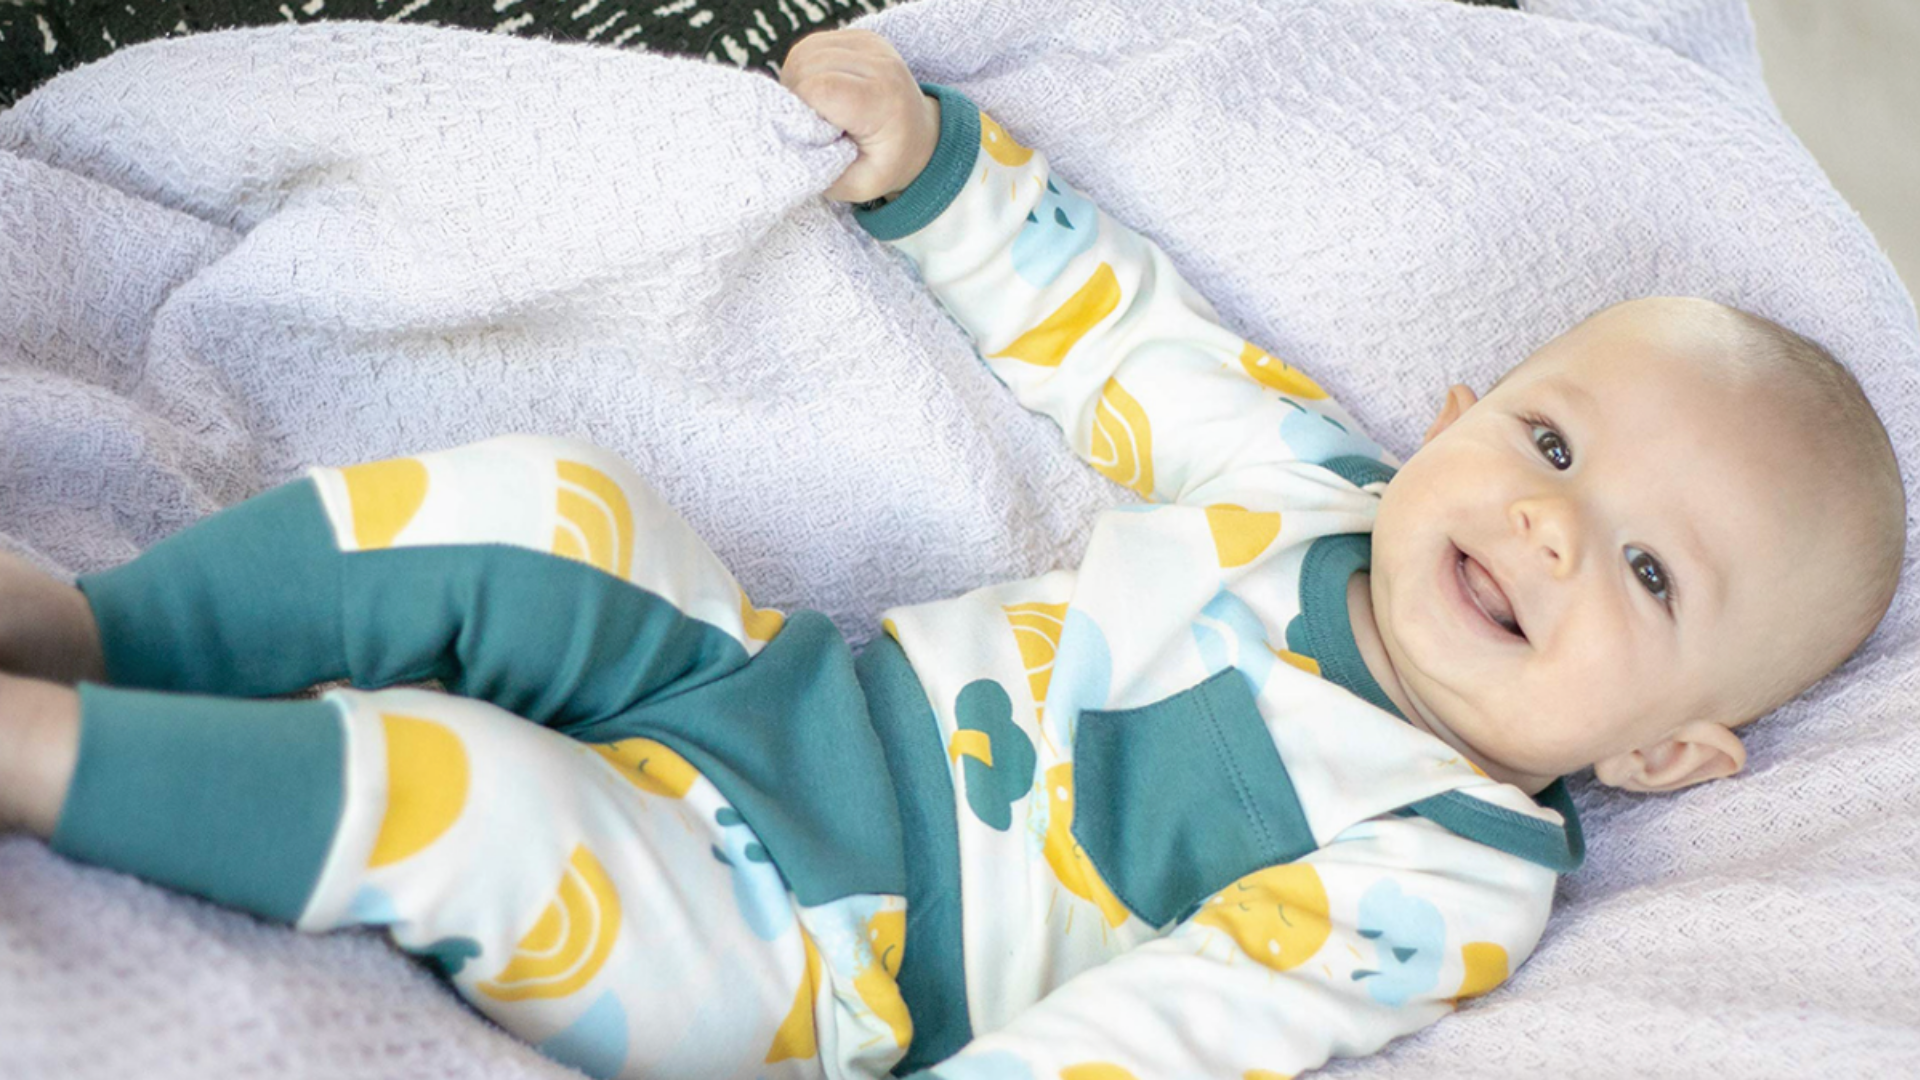 Affordable organic baby clothes: Pact, Parade Organics and more